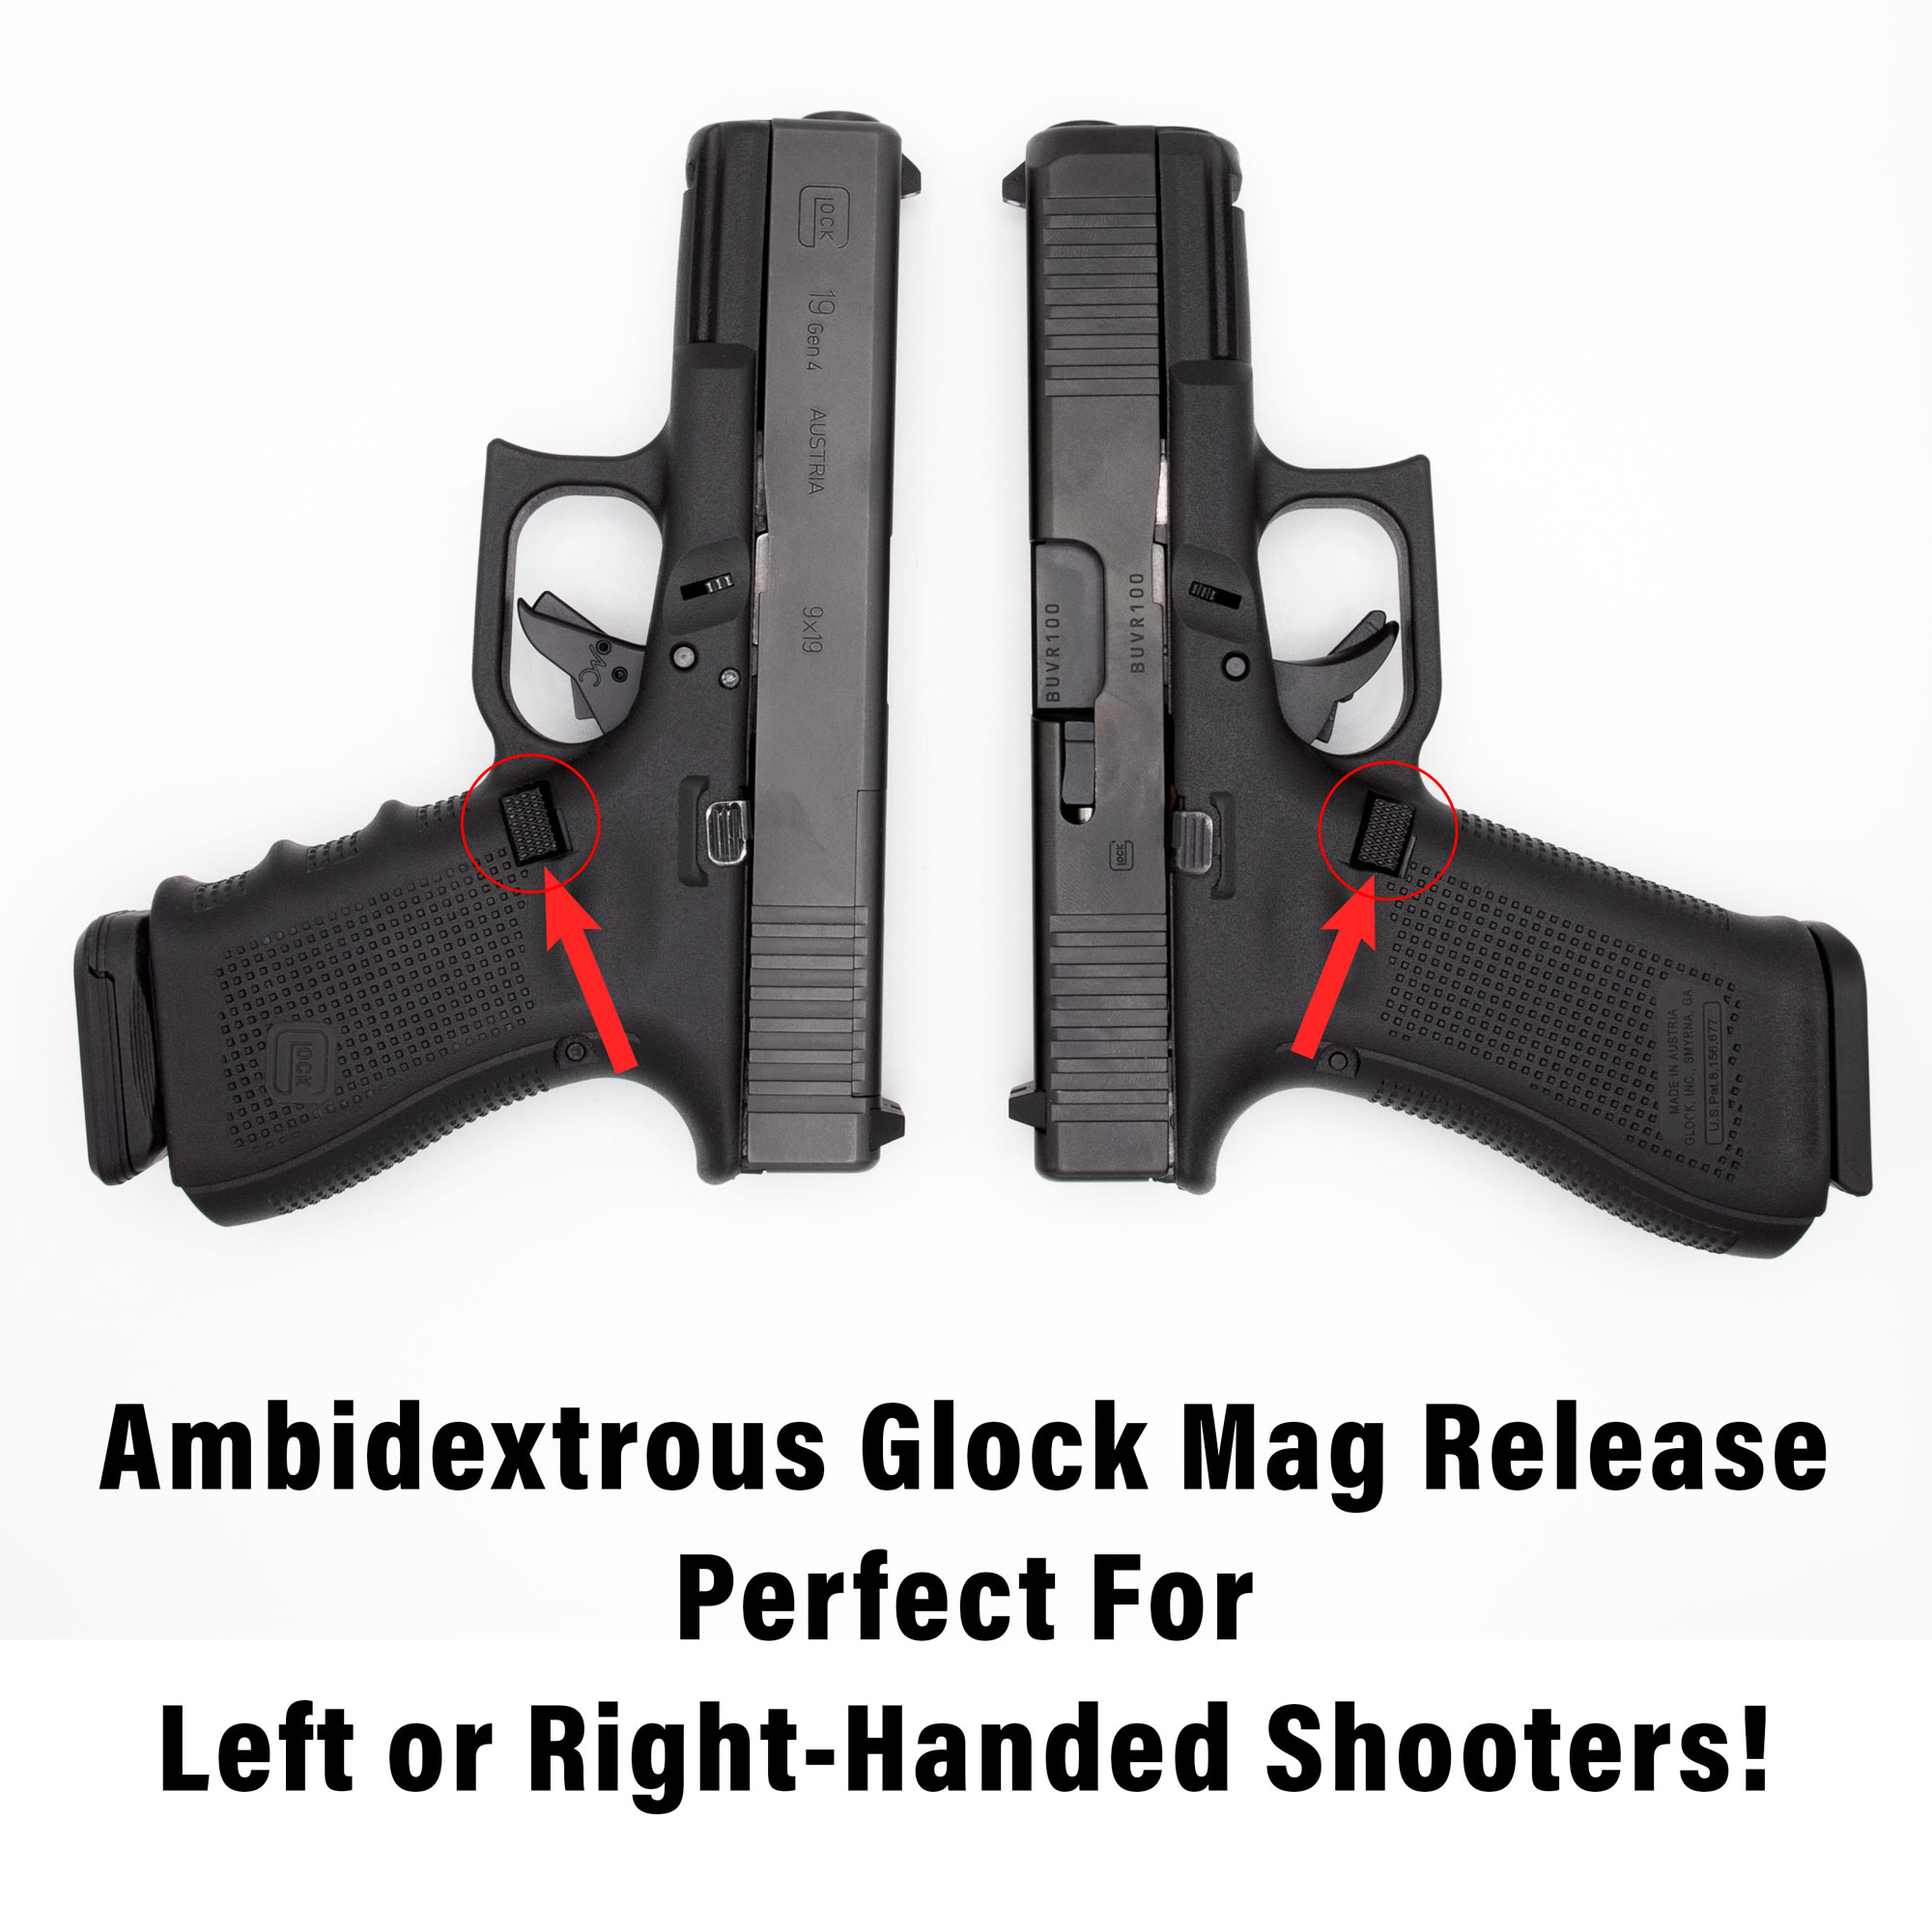 Ambidextrous Glock Mag Release Graphic